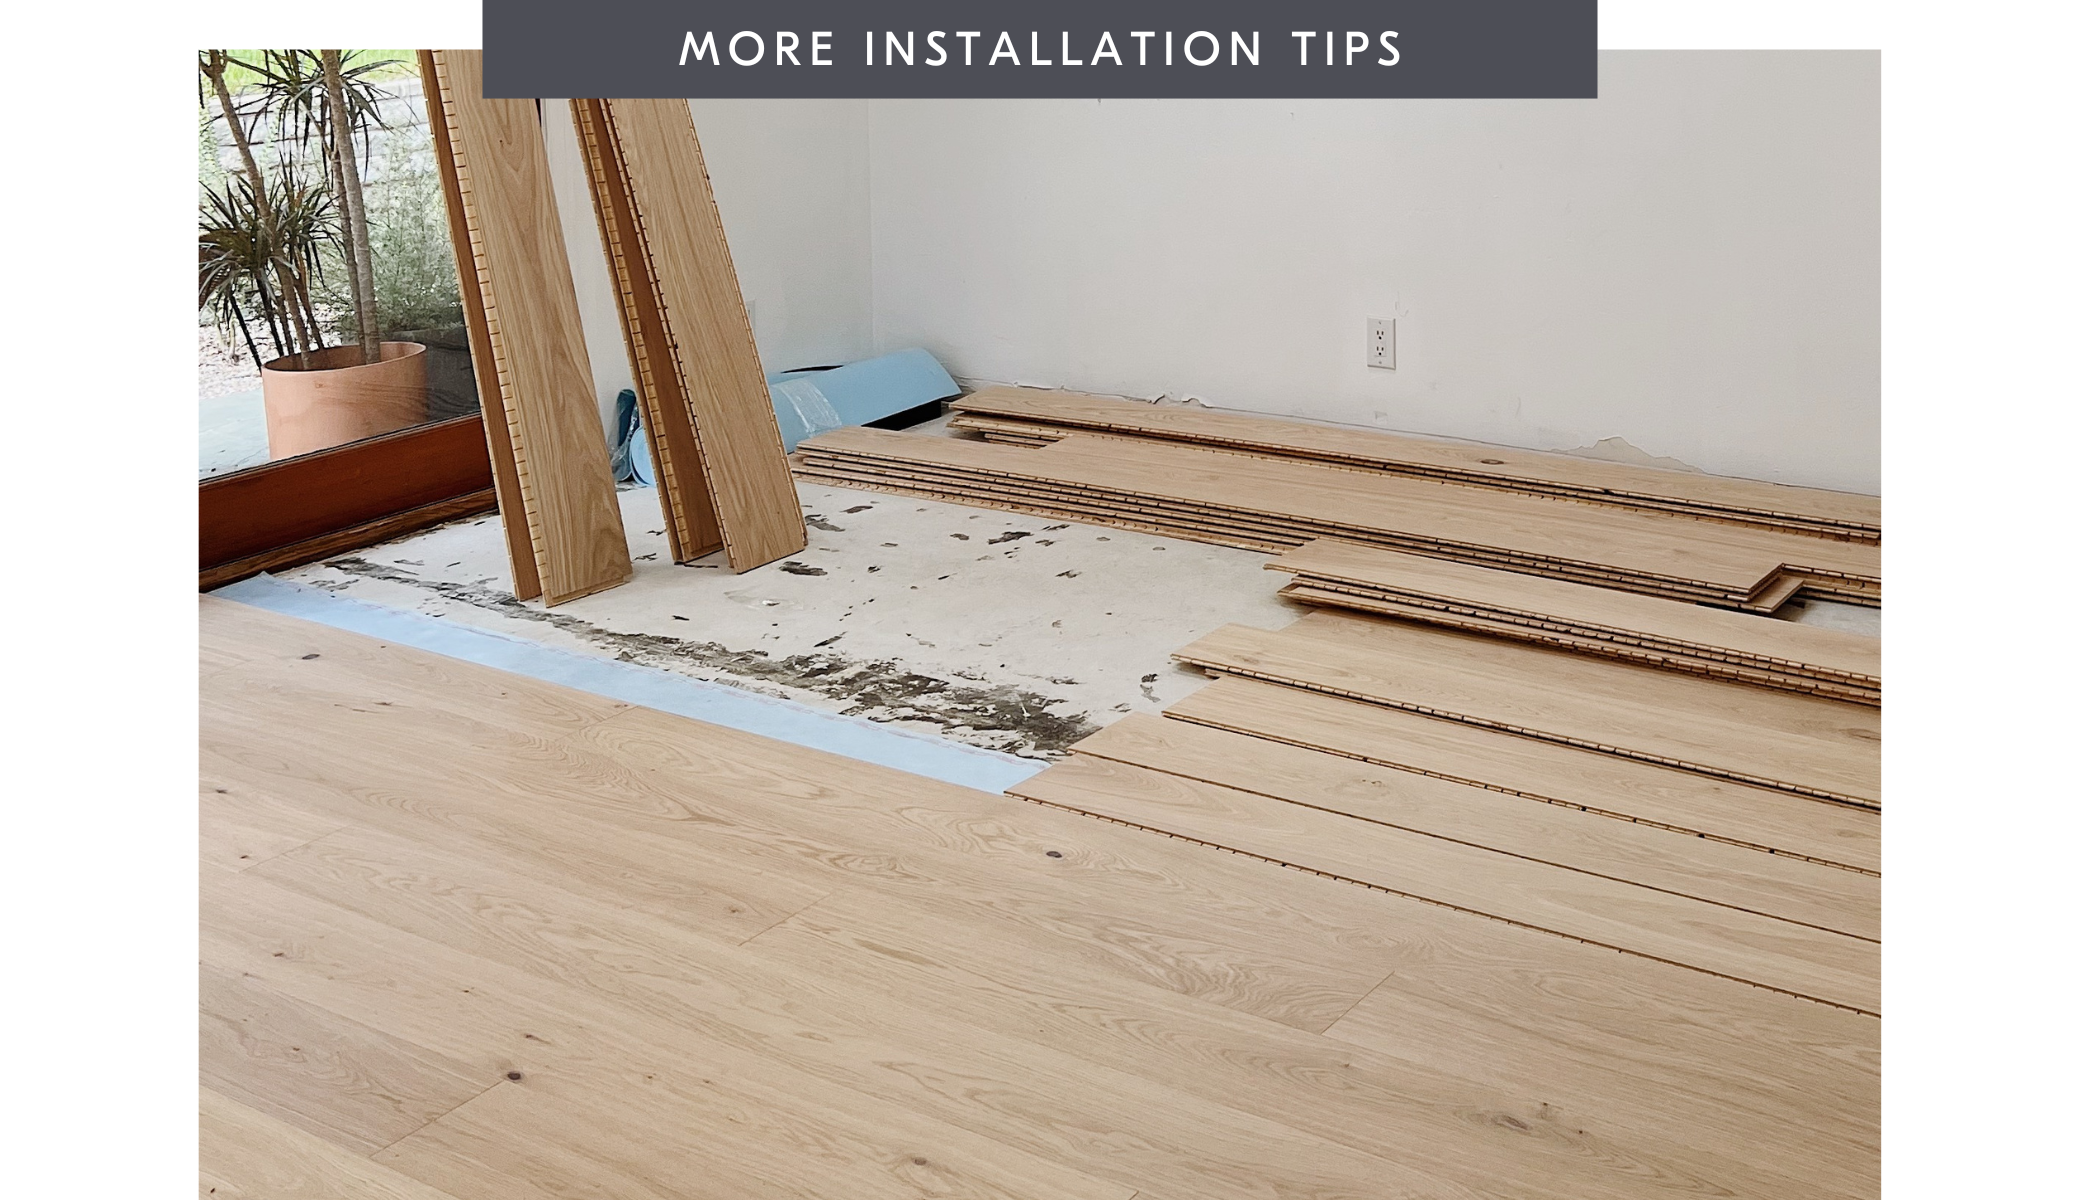 More installation tips for engineered wood flooring by Stuga